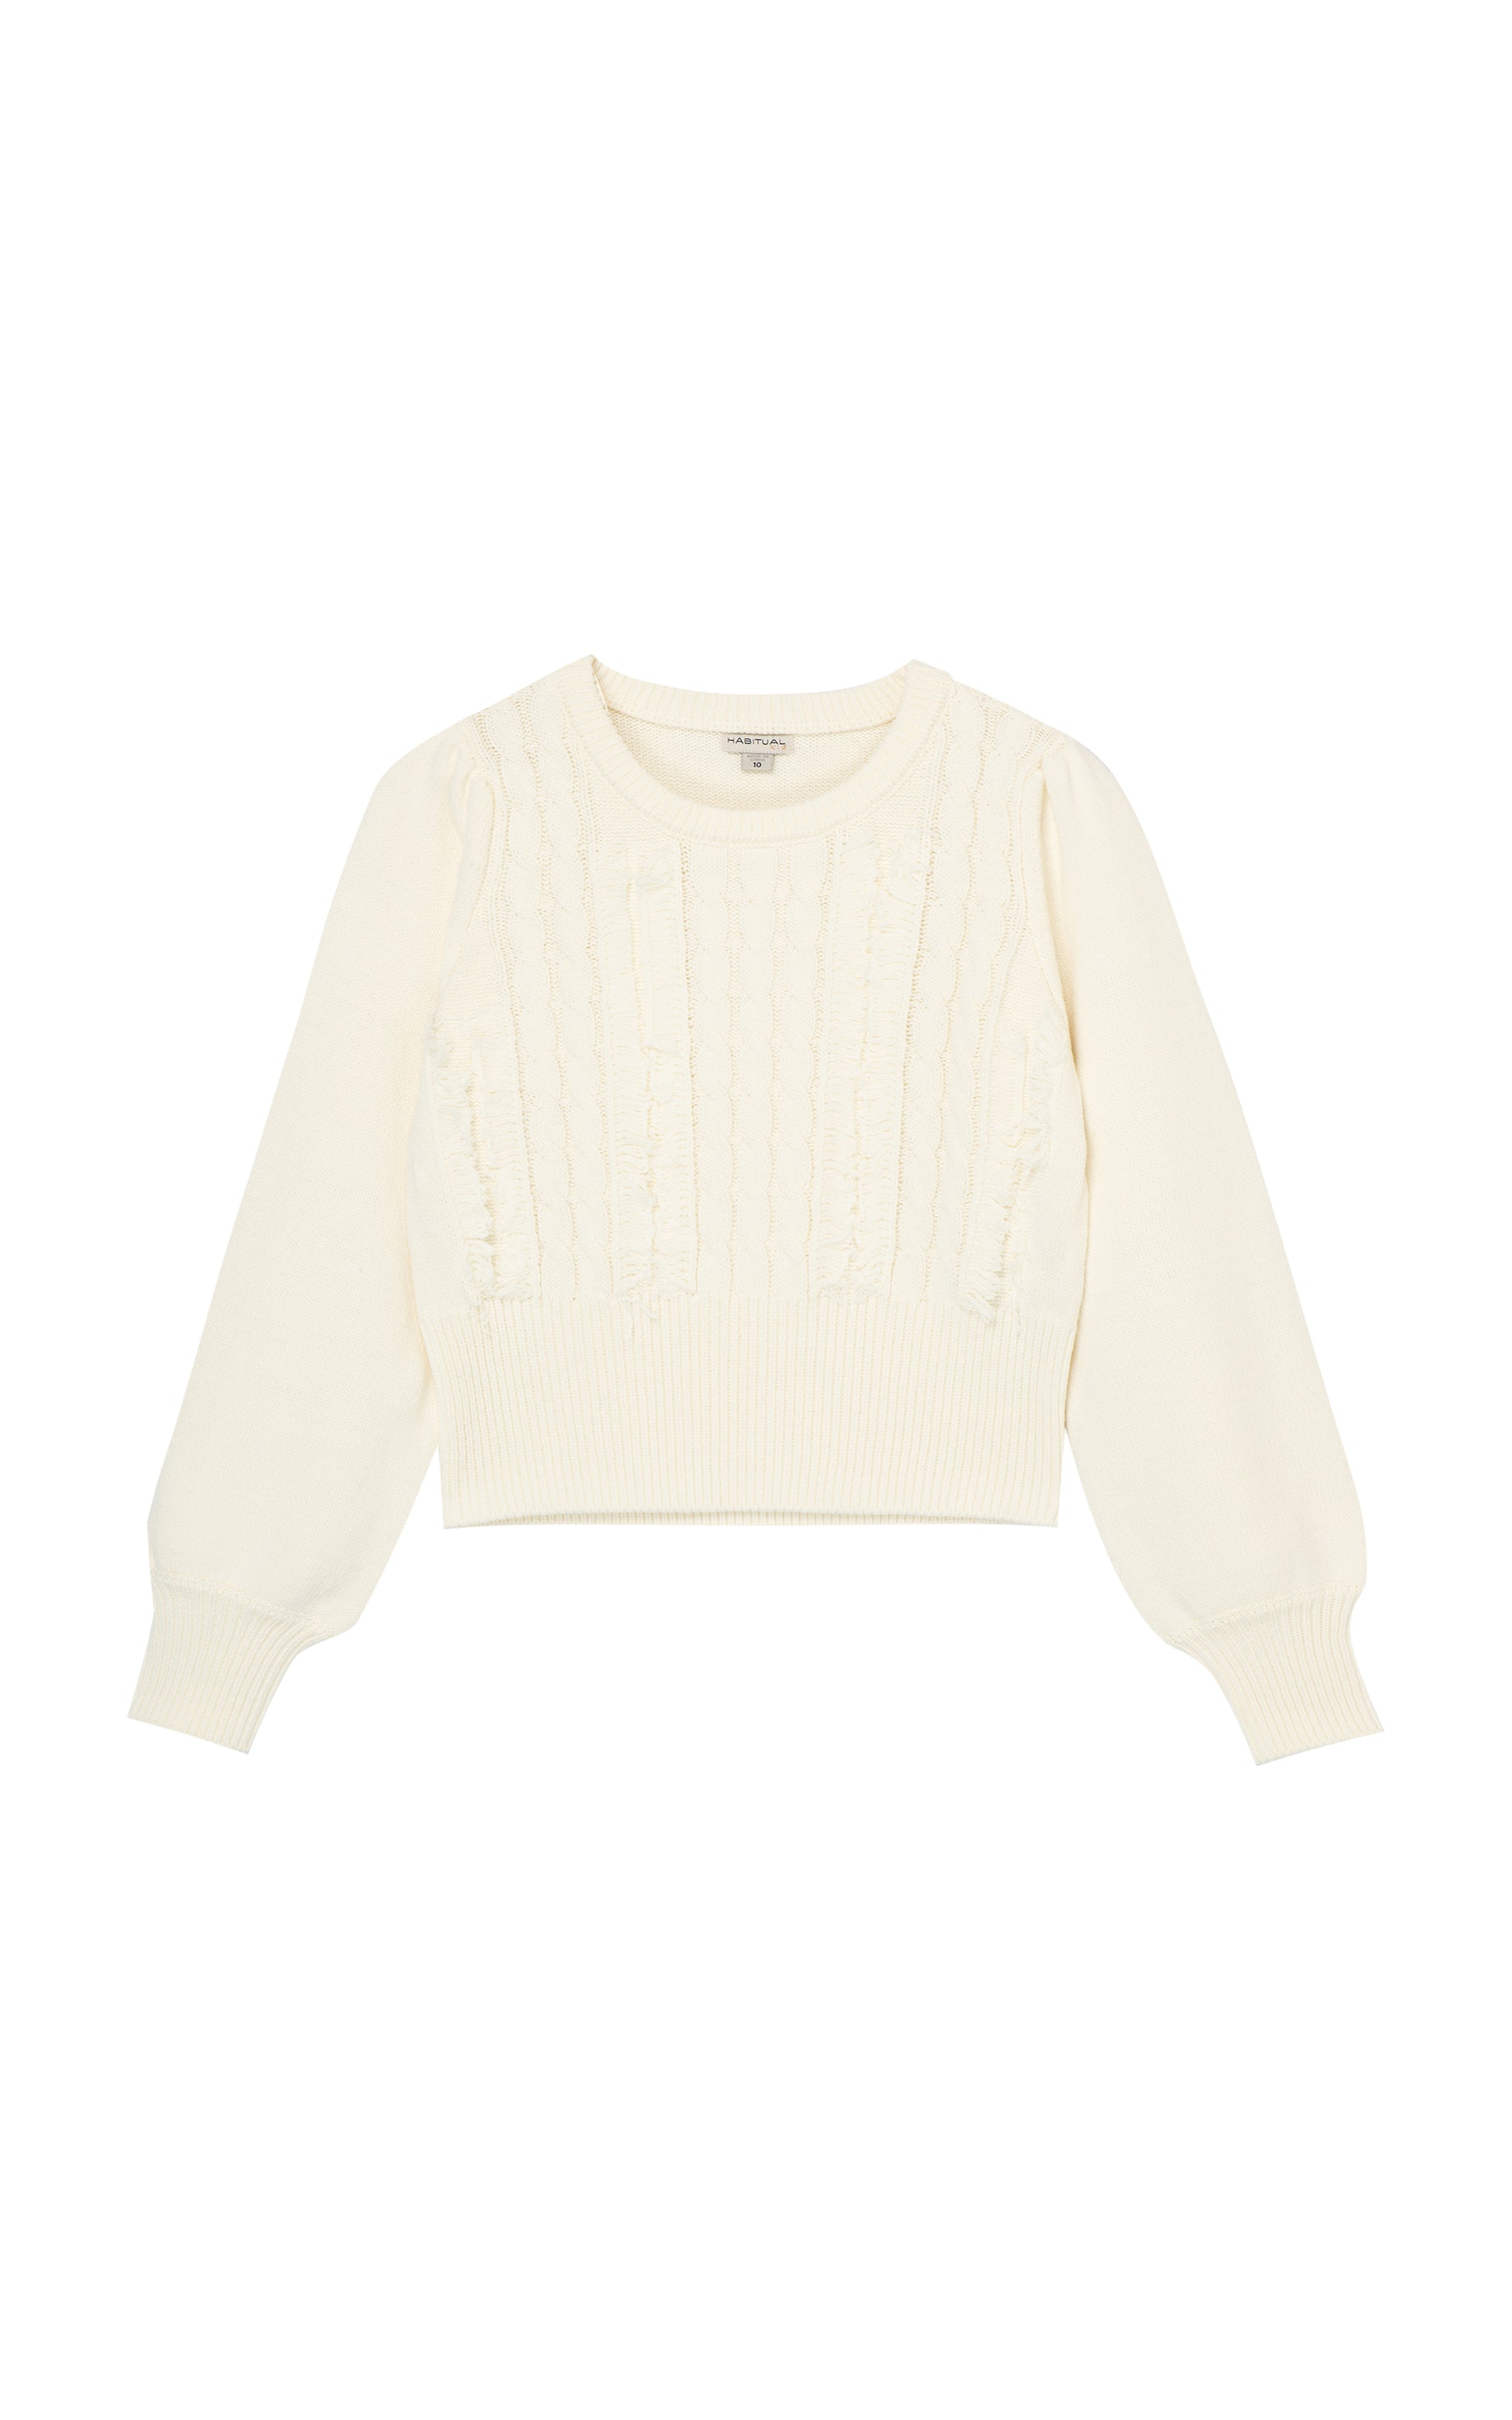 Front view of an off-white cable-knit sweater with fringe detailing